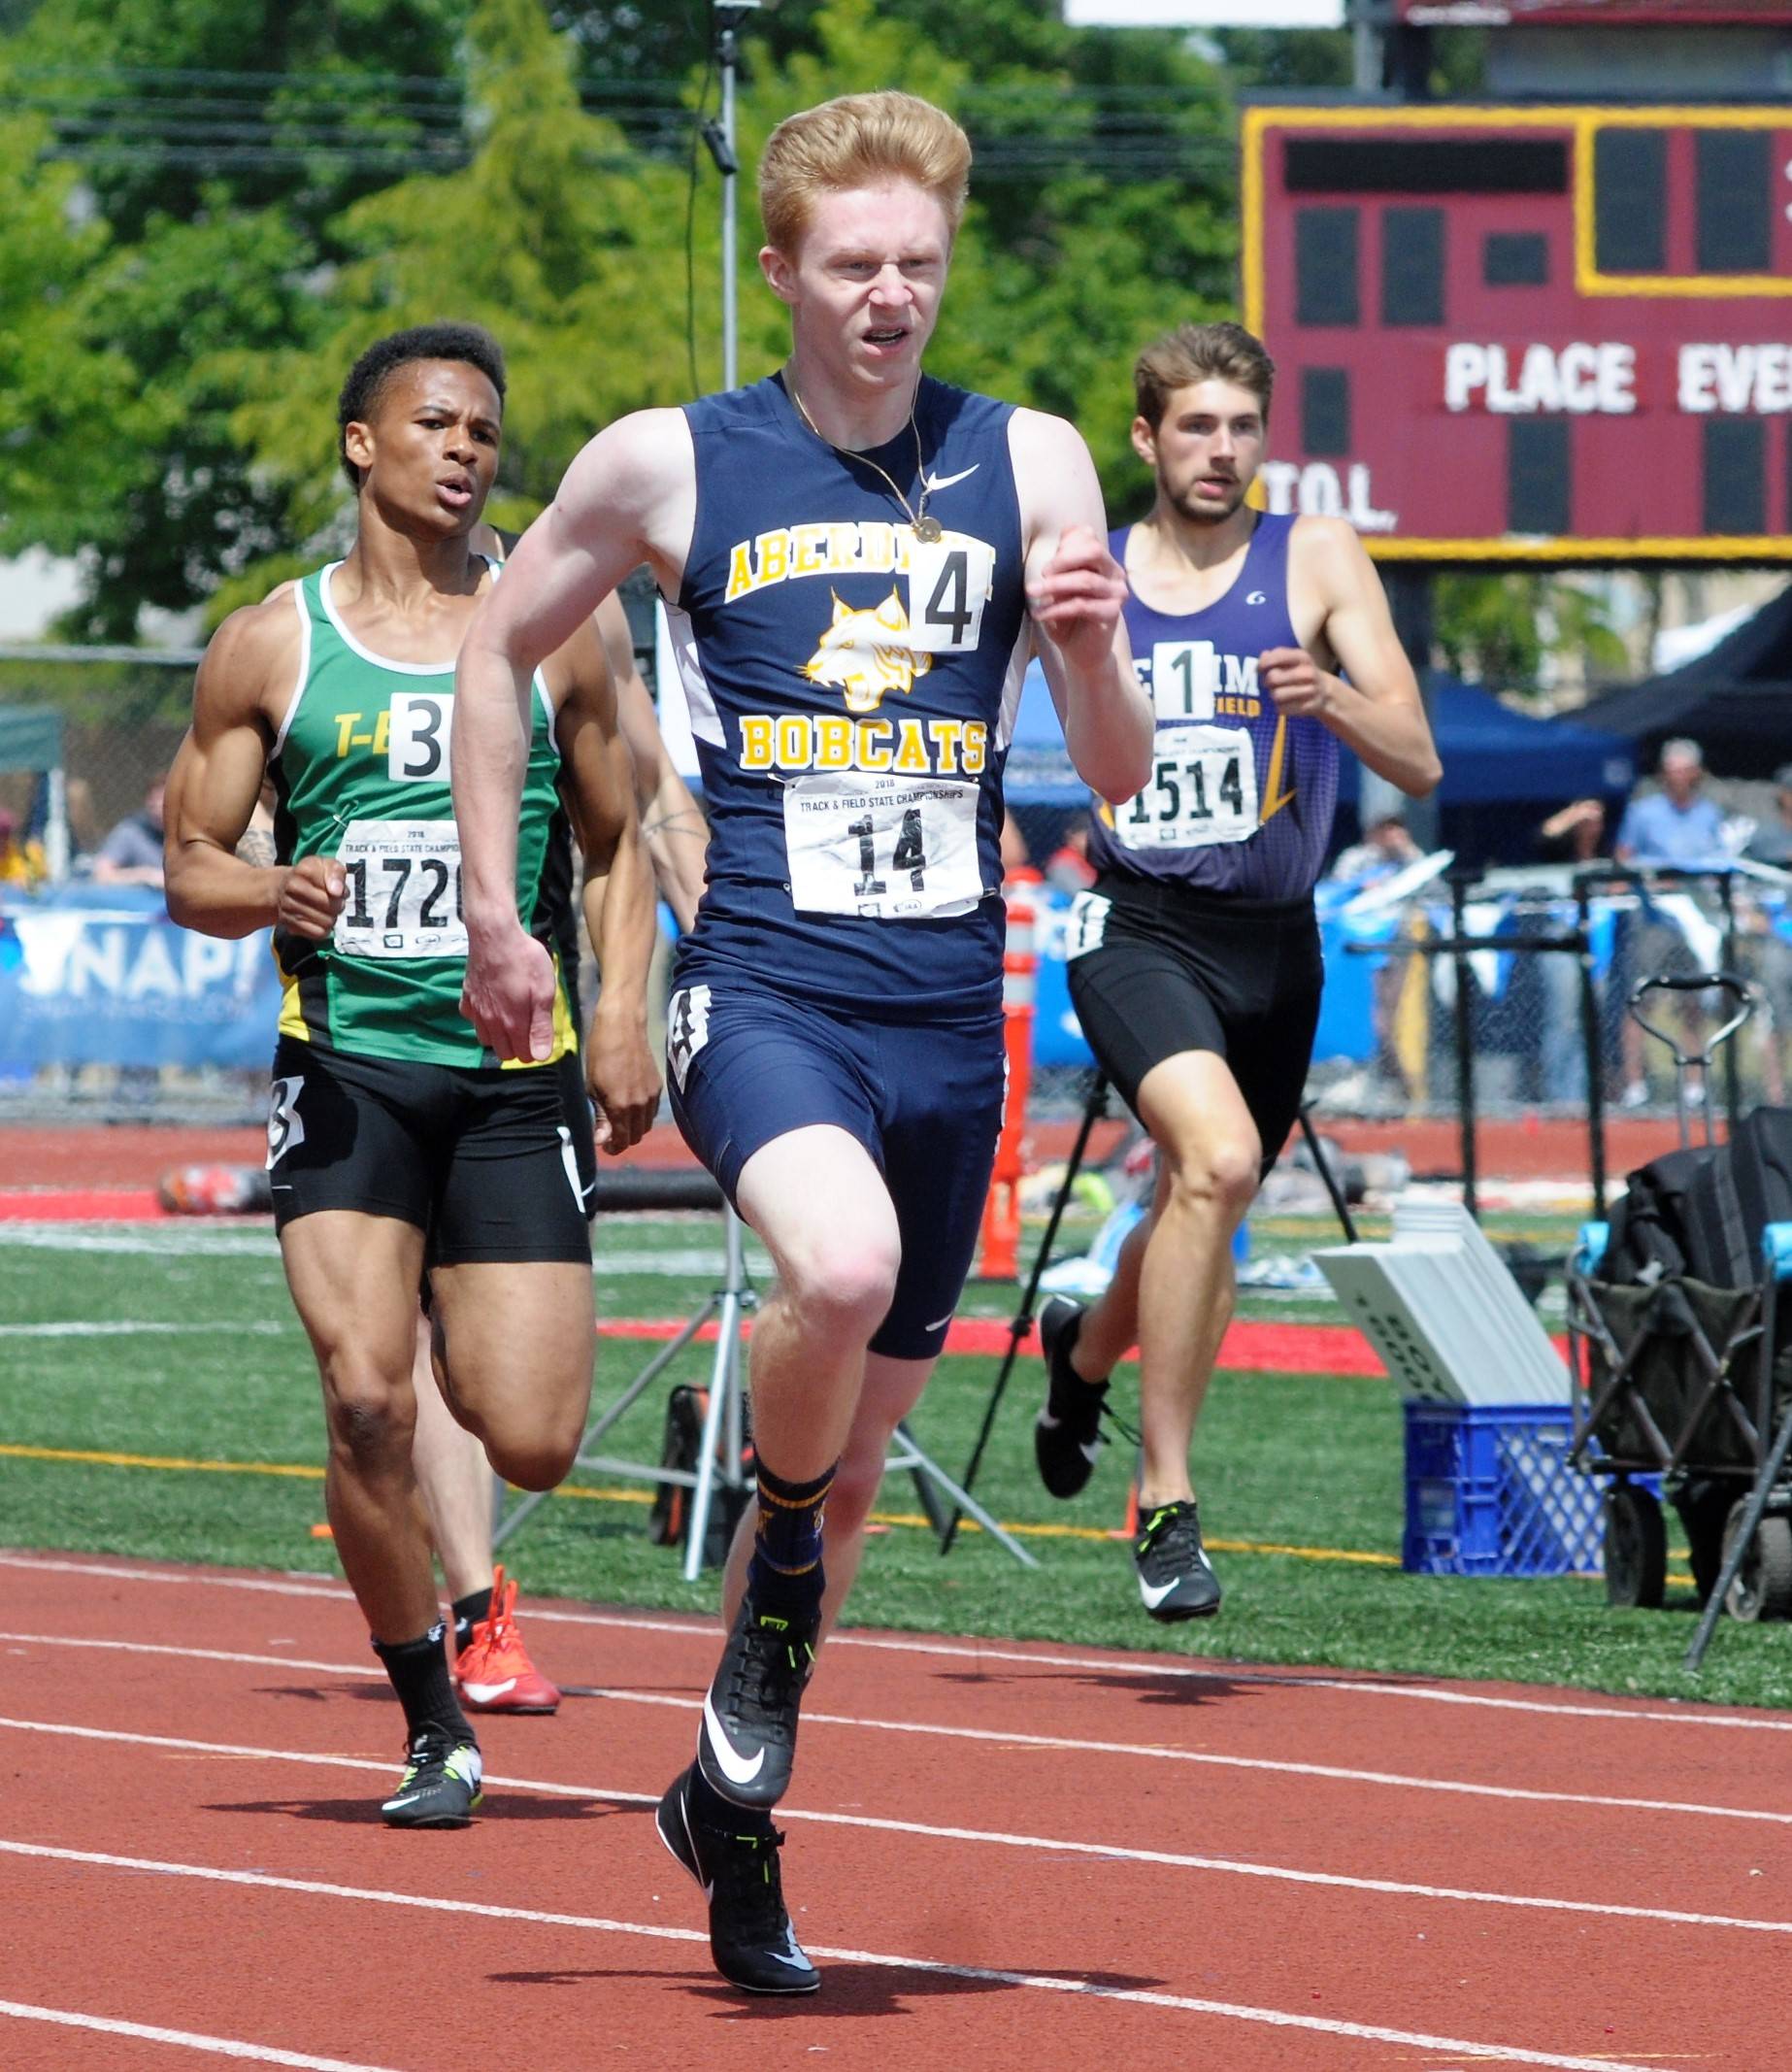 Aberdeen’s Bryan Sidor wins state title in 400 meters